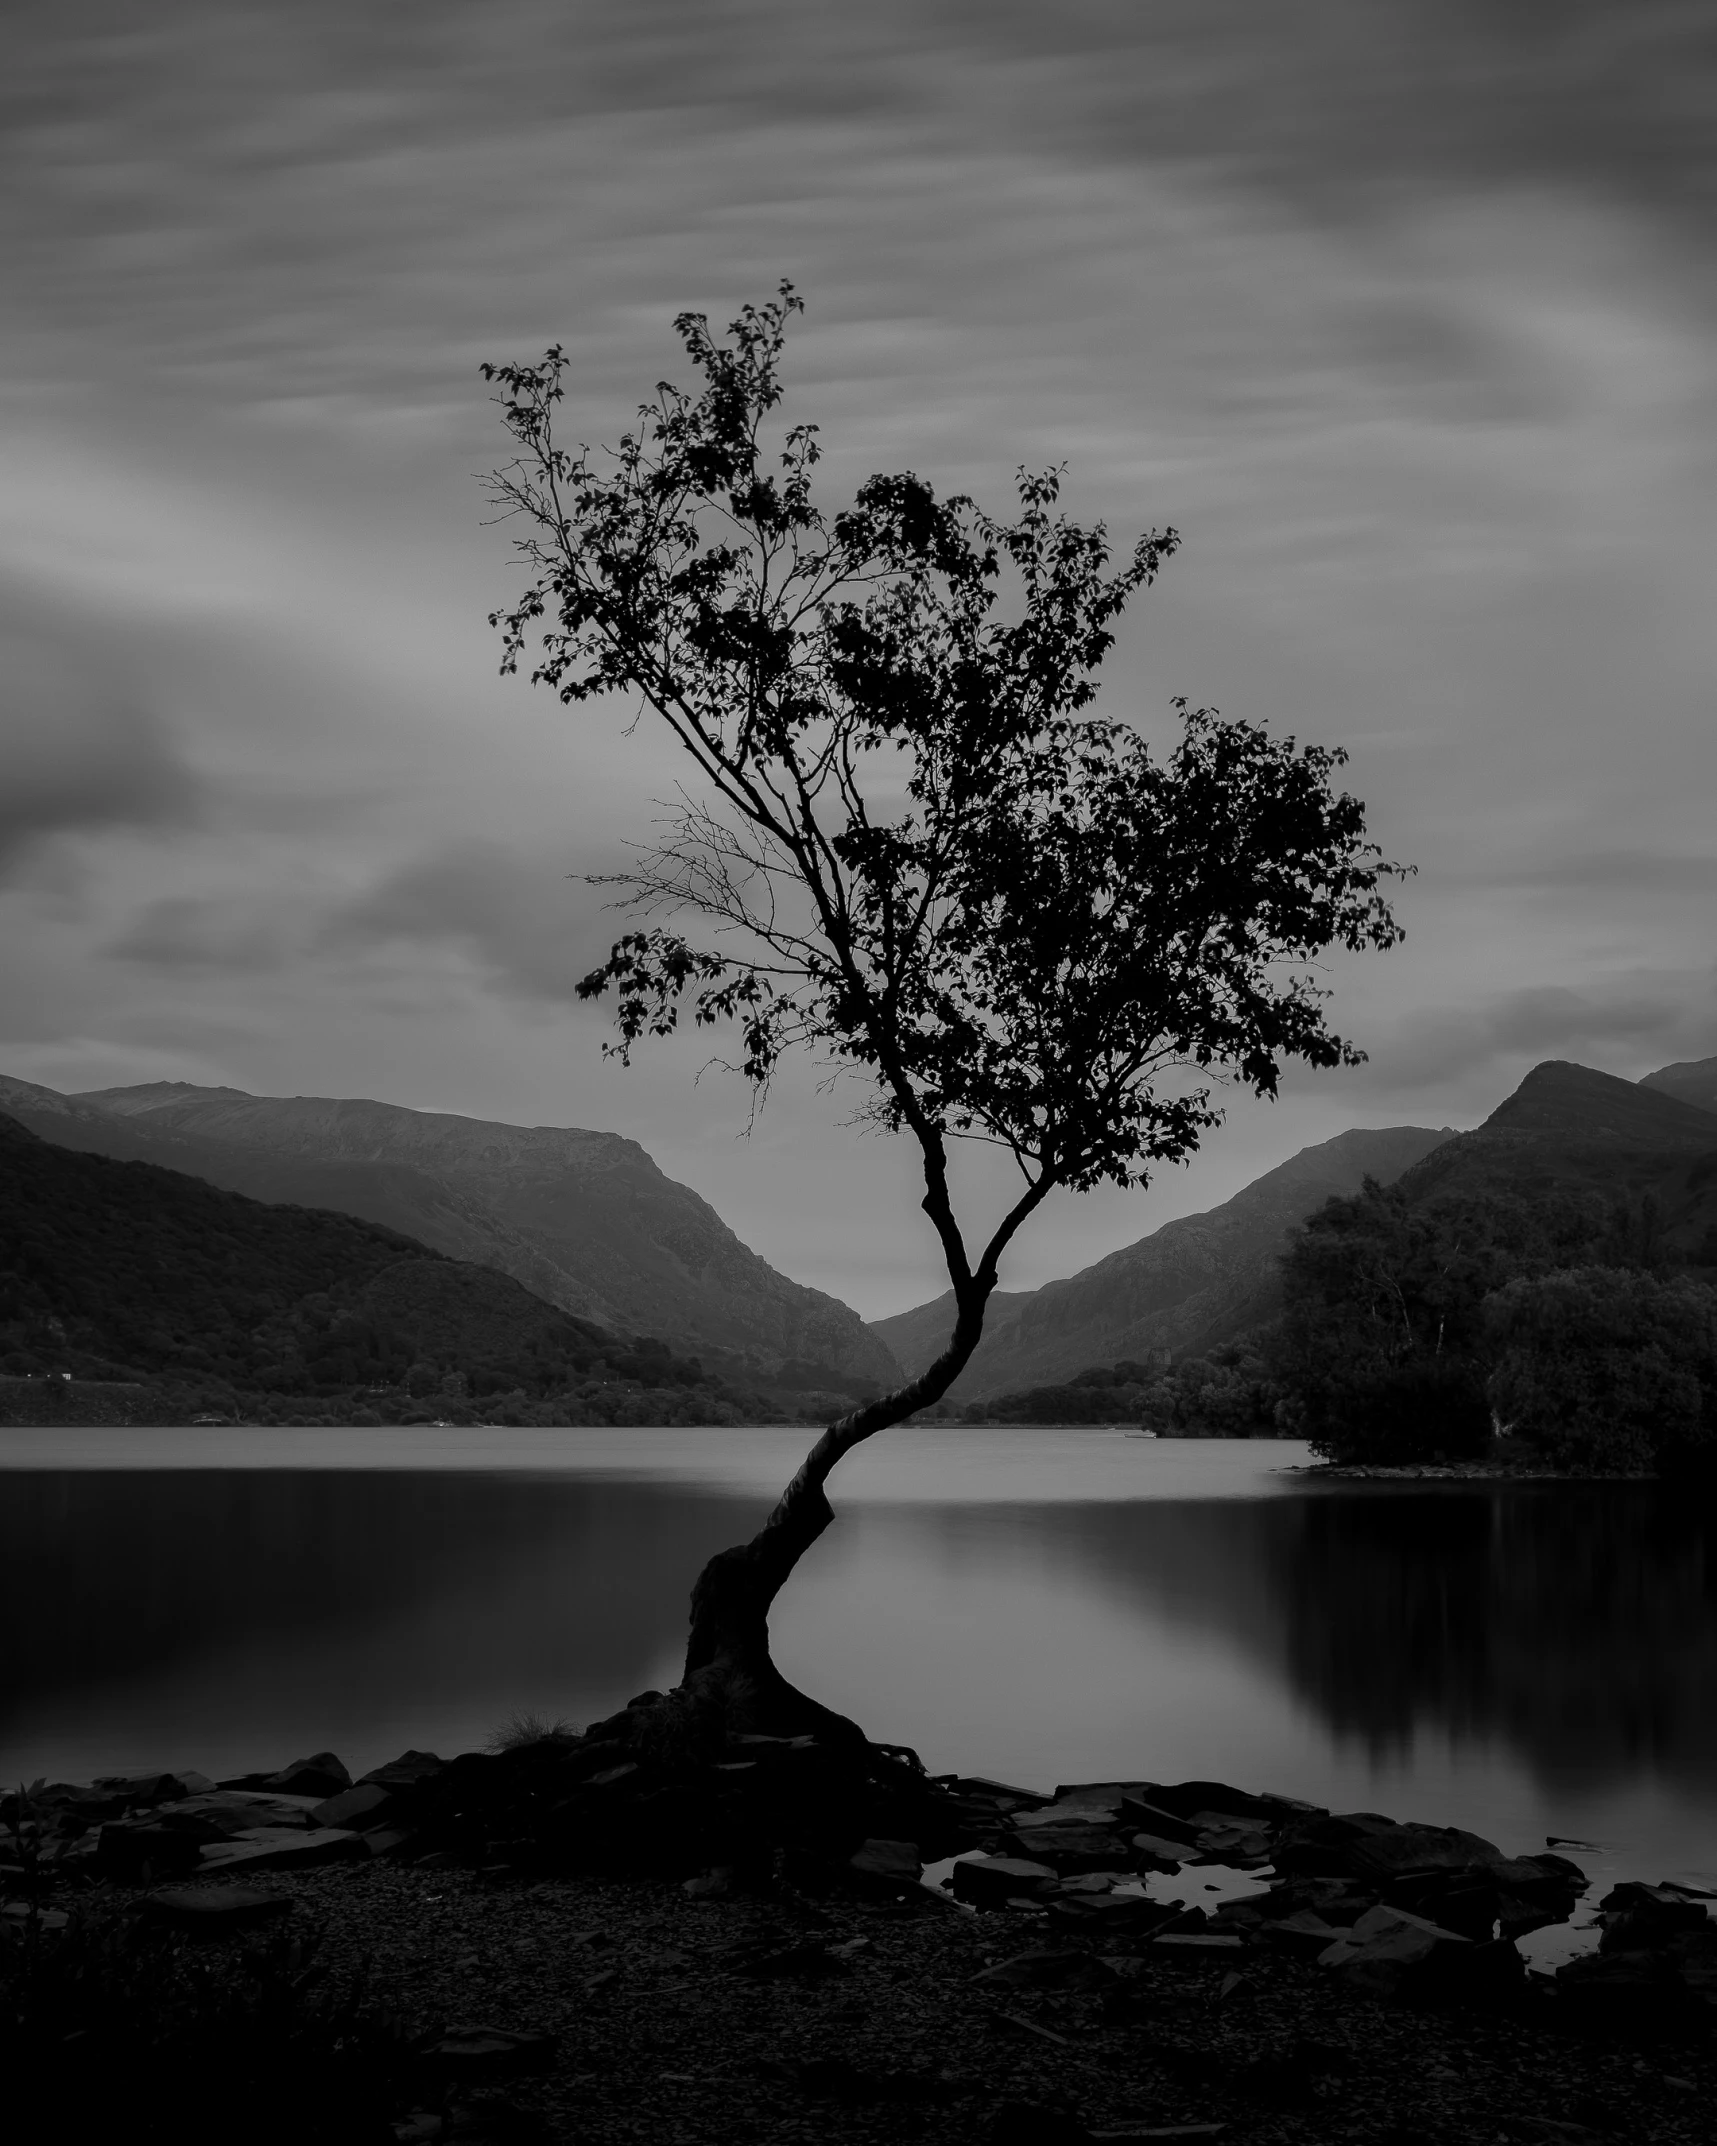 tree with no leaves in the foreground next to mountains and water